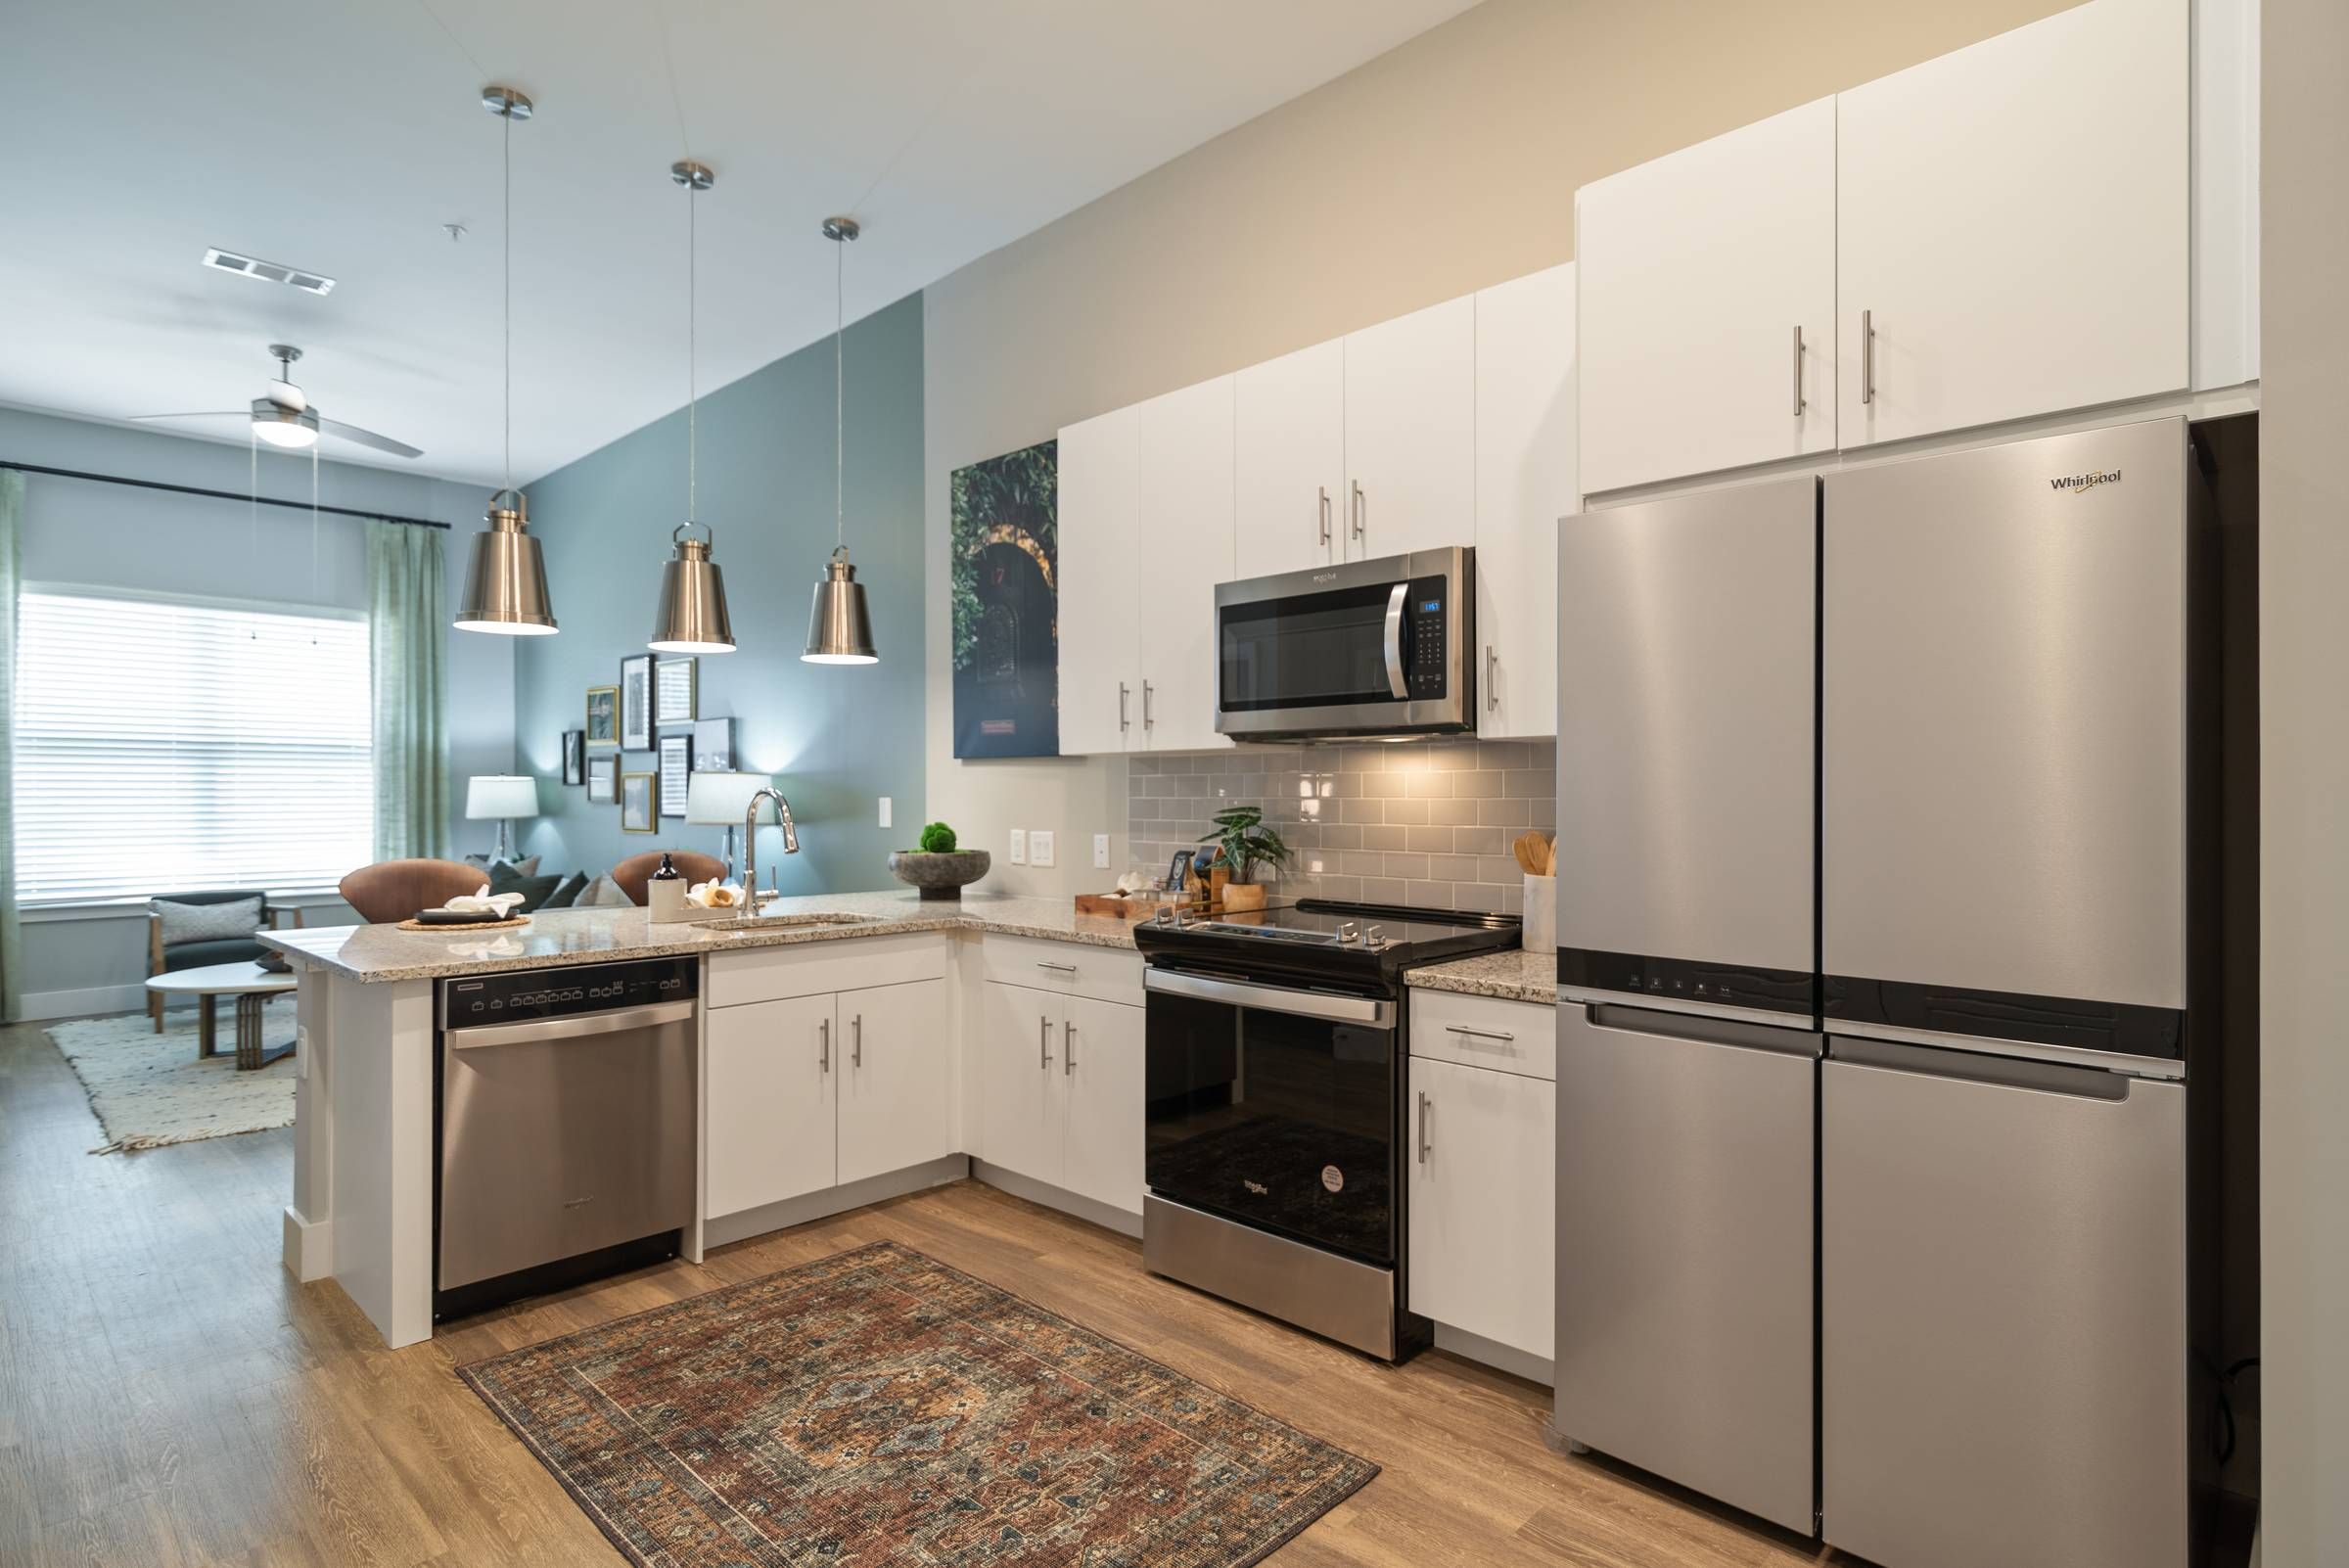 Alta Depot kitchen featuring stainless steel appliances and a chic rug.